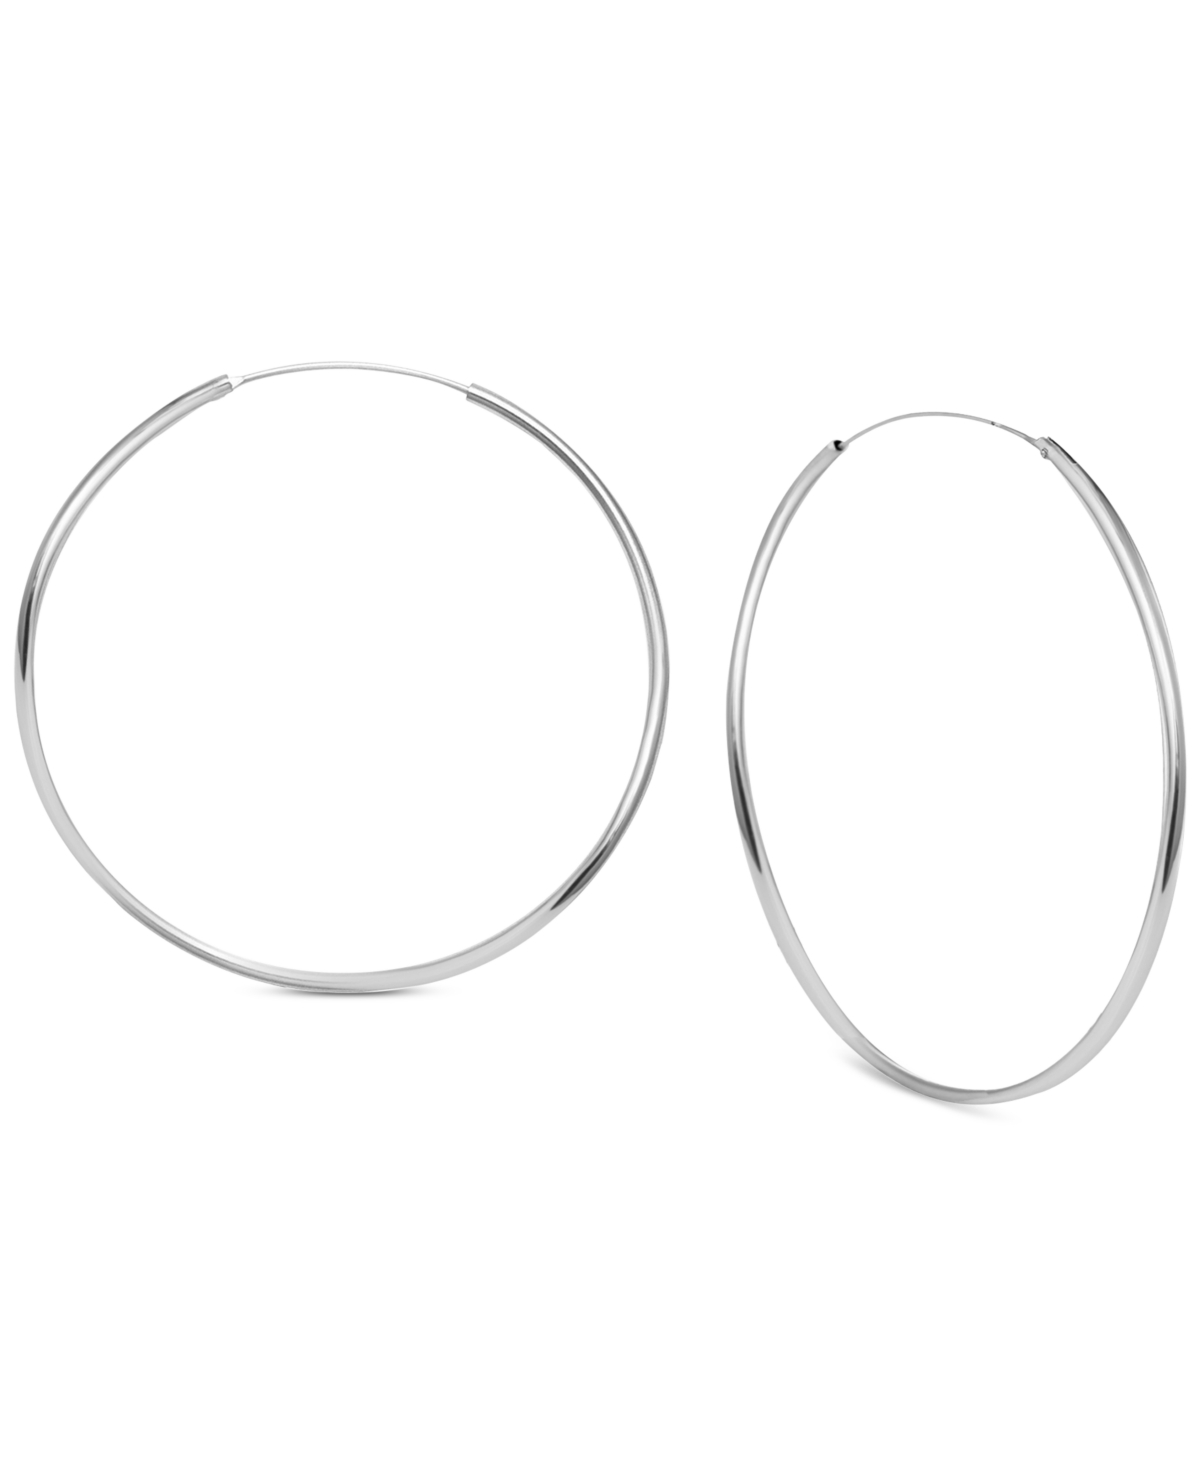 Argento Vivo Large Endless Large Hoop Earrings in Gold-Plated Sterling Silver